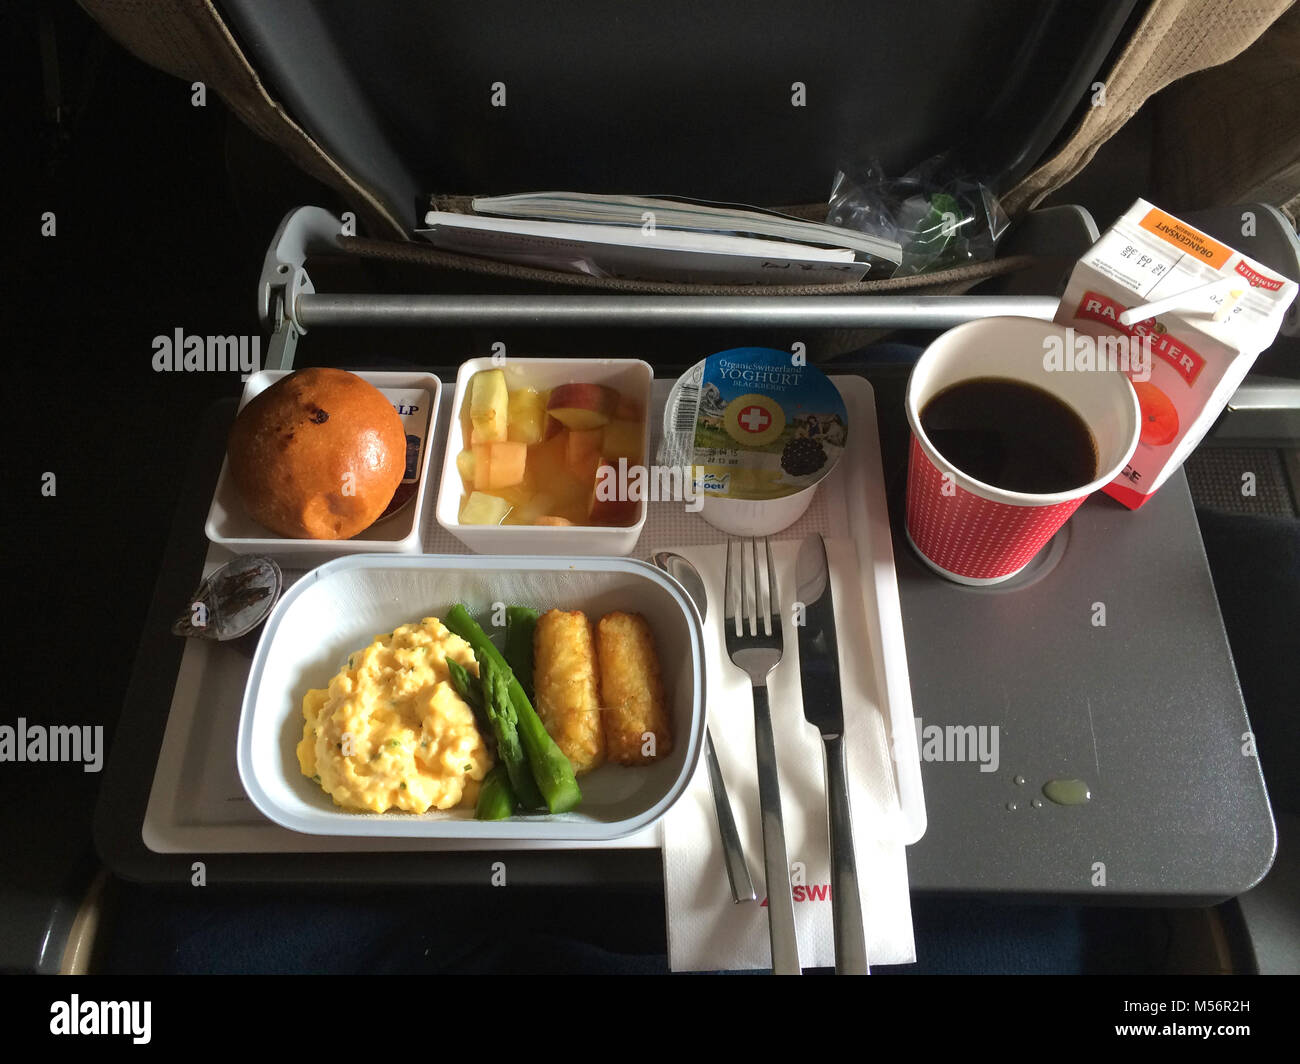 ZURICH, SWITZERLAND - MAR 31st, 2015: A breakfast meal with coffee, butter, bread, yogurt and scrambled eggs on a tray, onboard a longhaul flight to Singapore in economy class Stock Photo